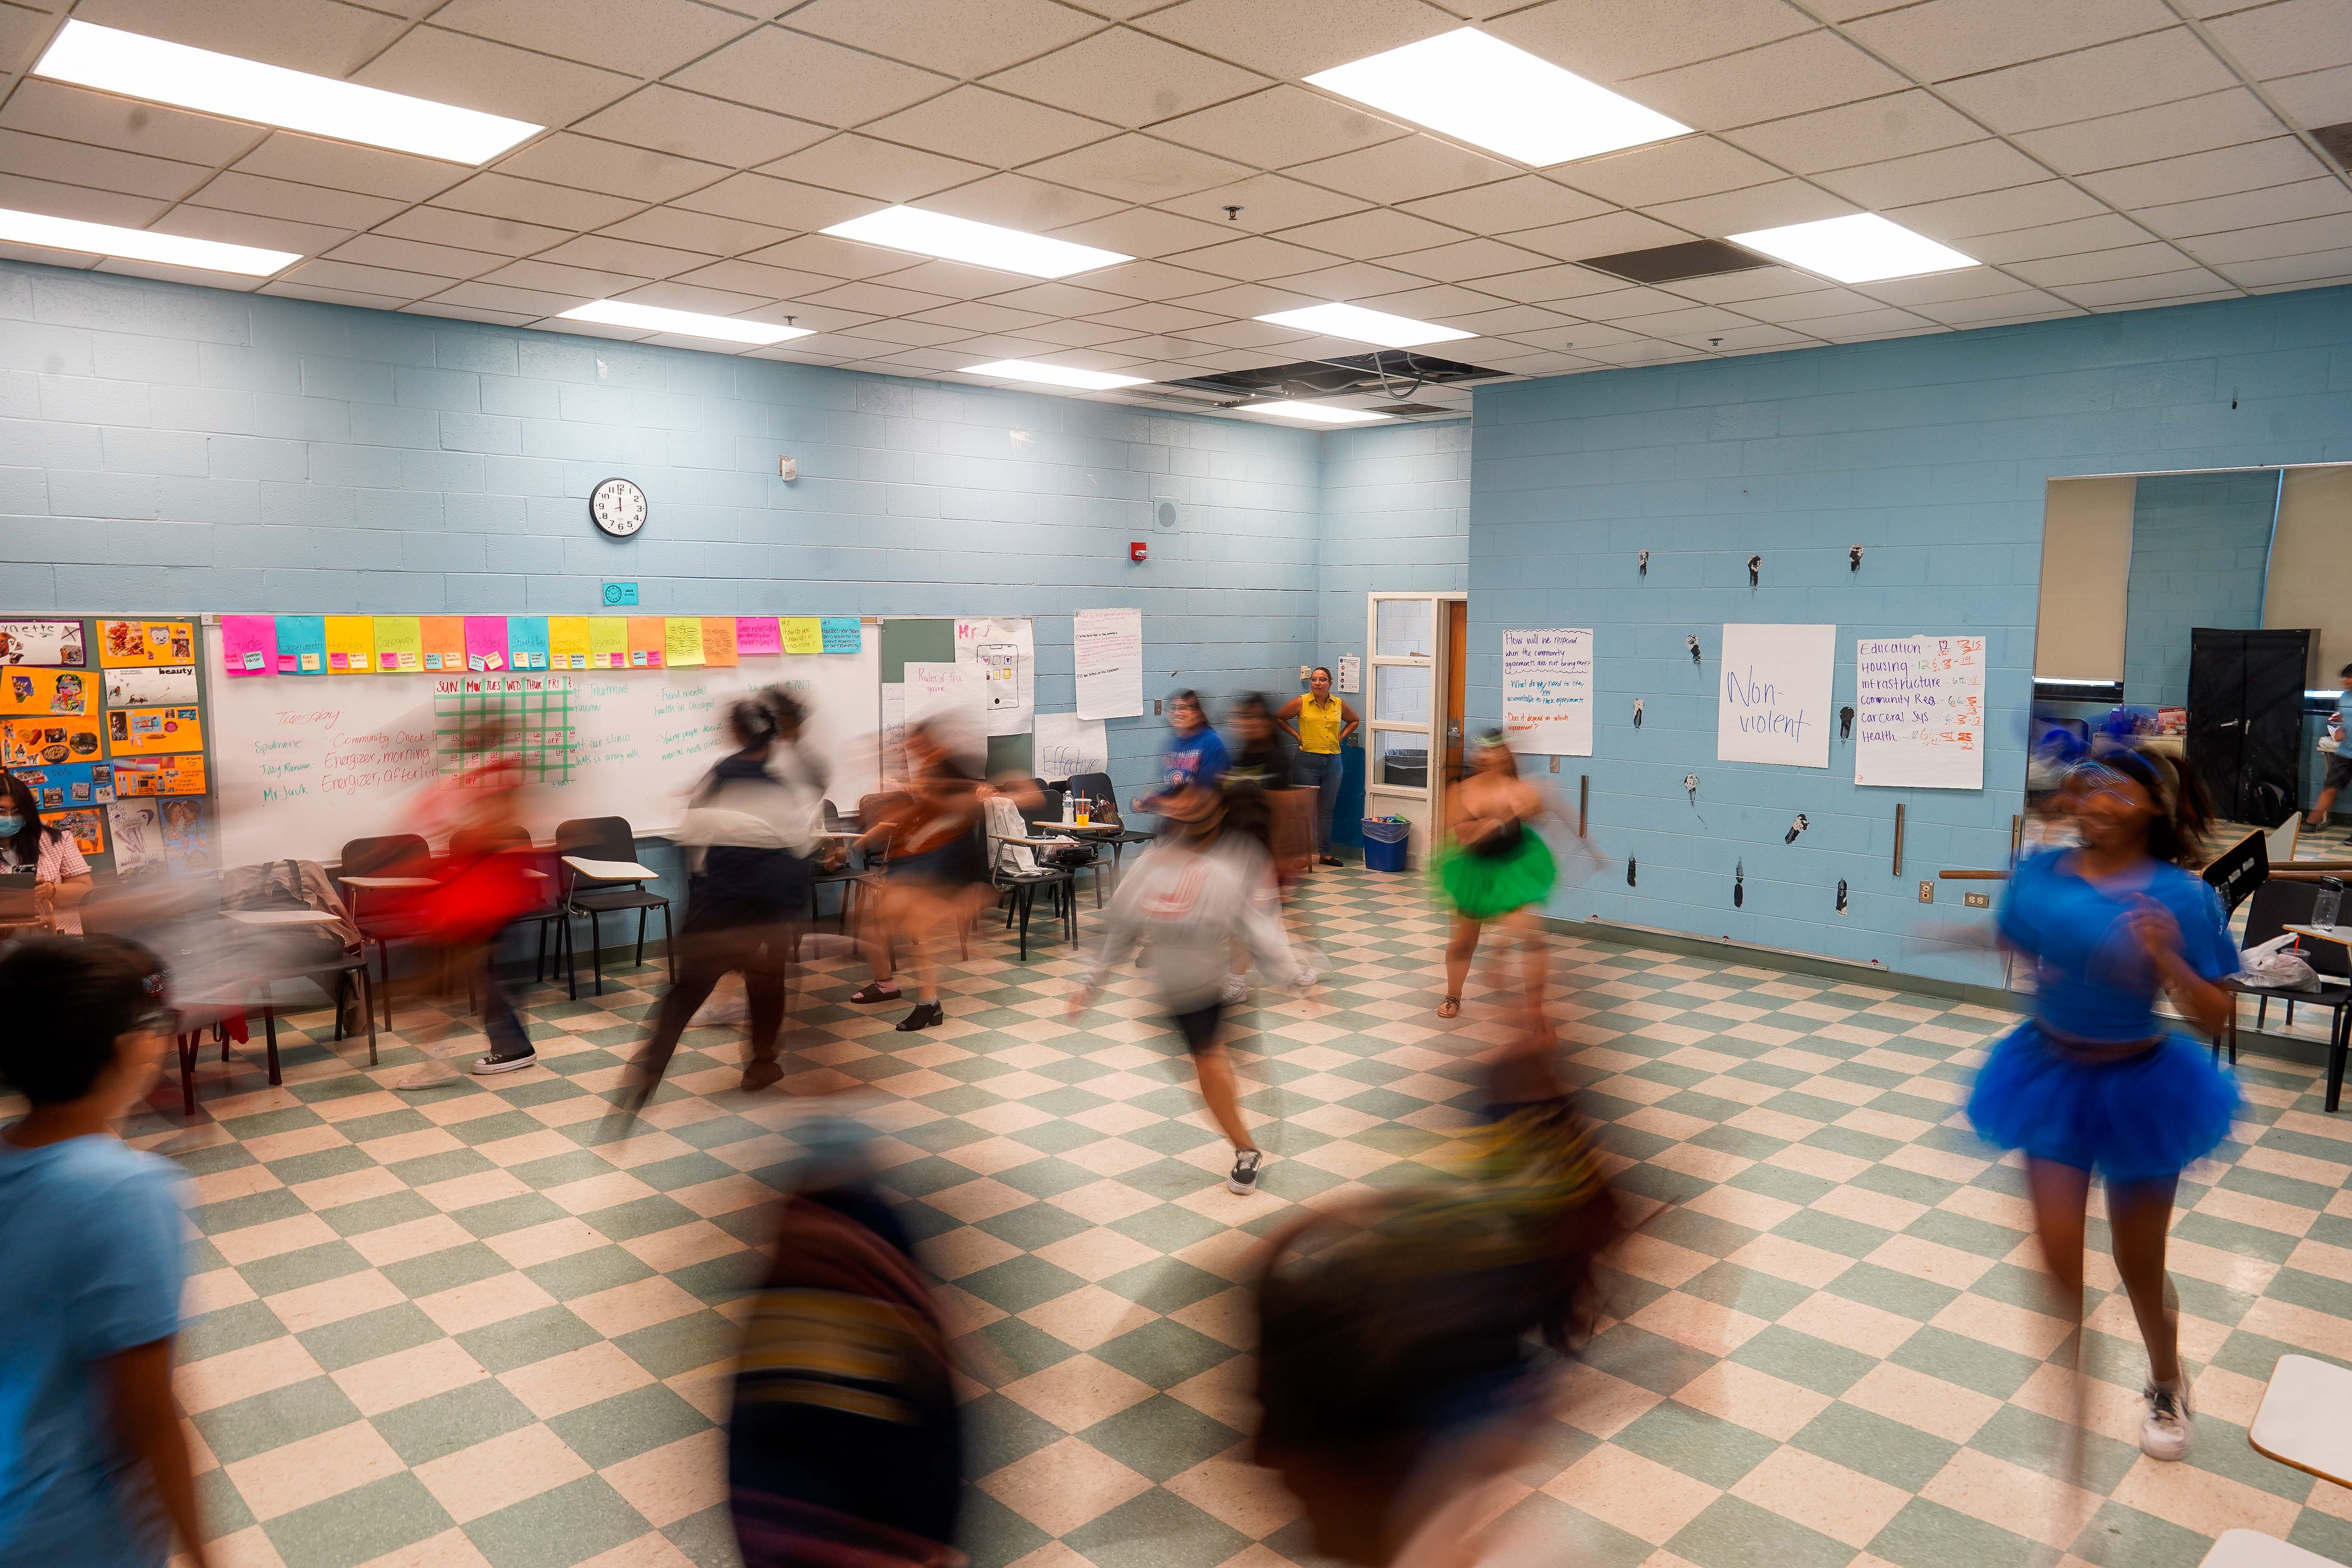 A room with blue walls and a checkered floor with students dancing who are blurred by the motion.